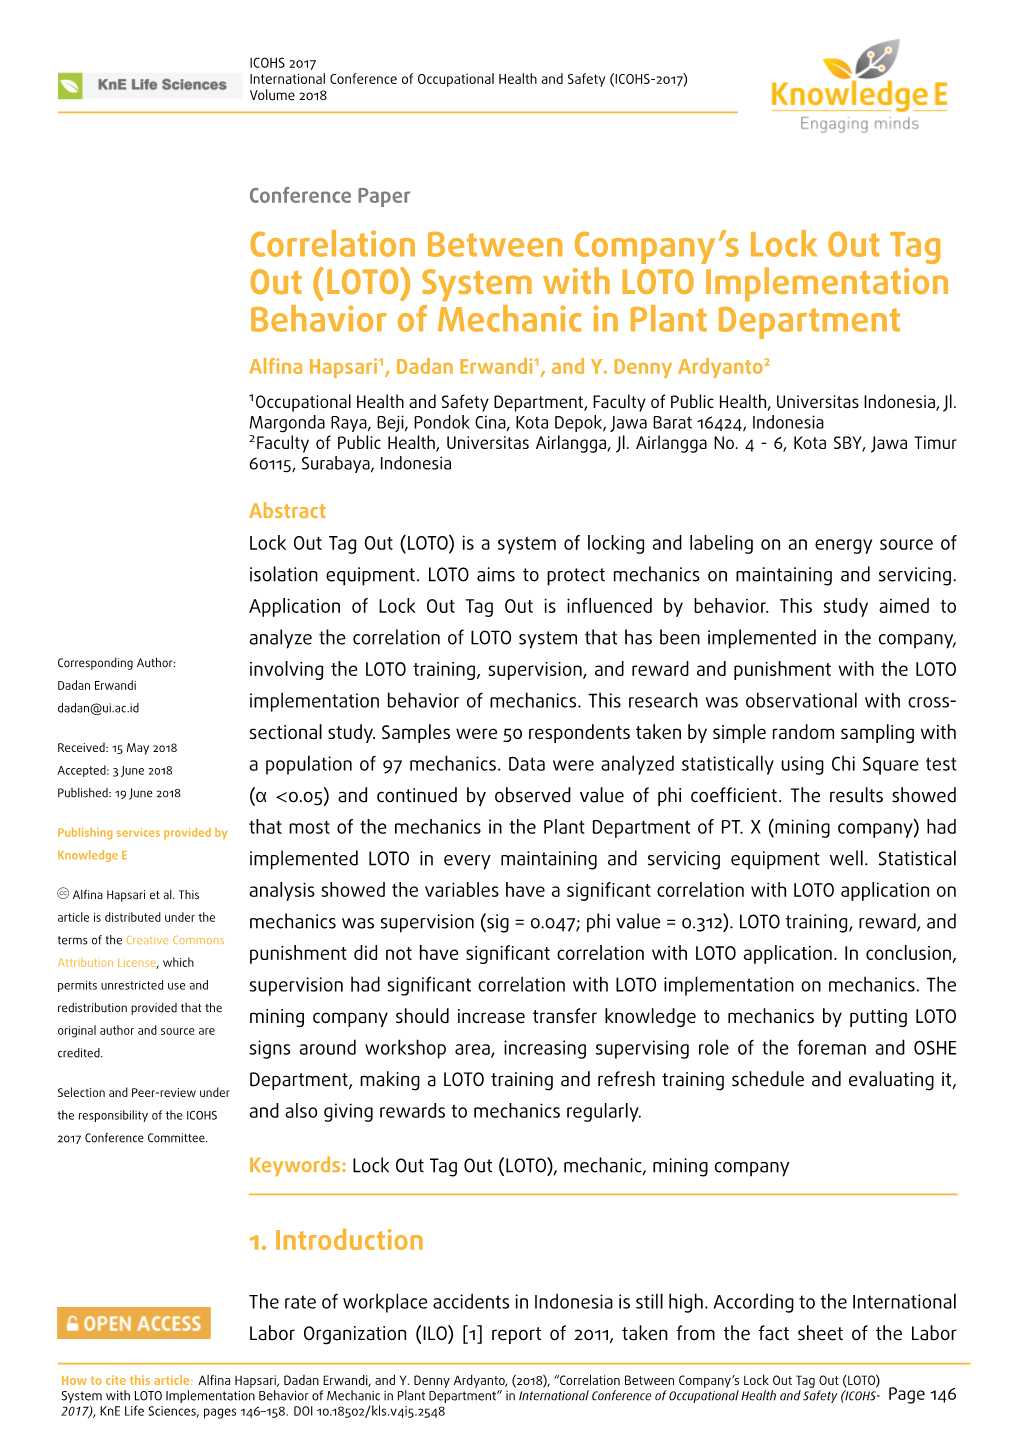 Correlation Between Company's Lock out Tag out (LOTO) System With